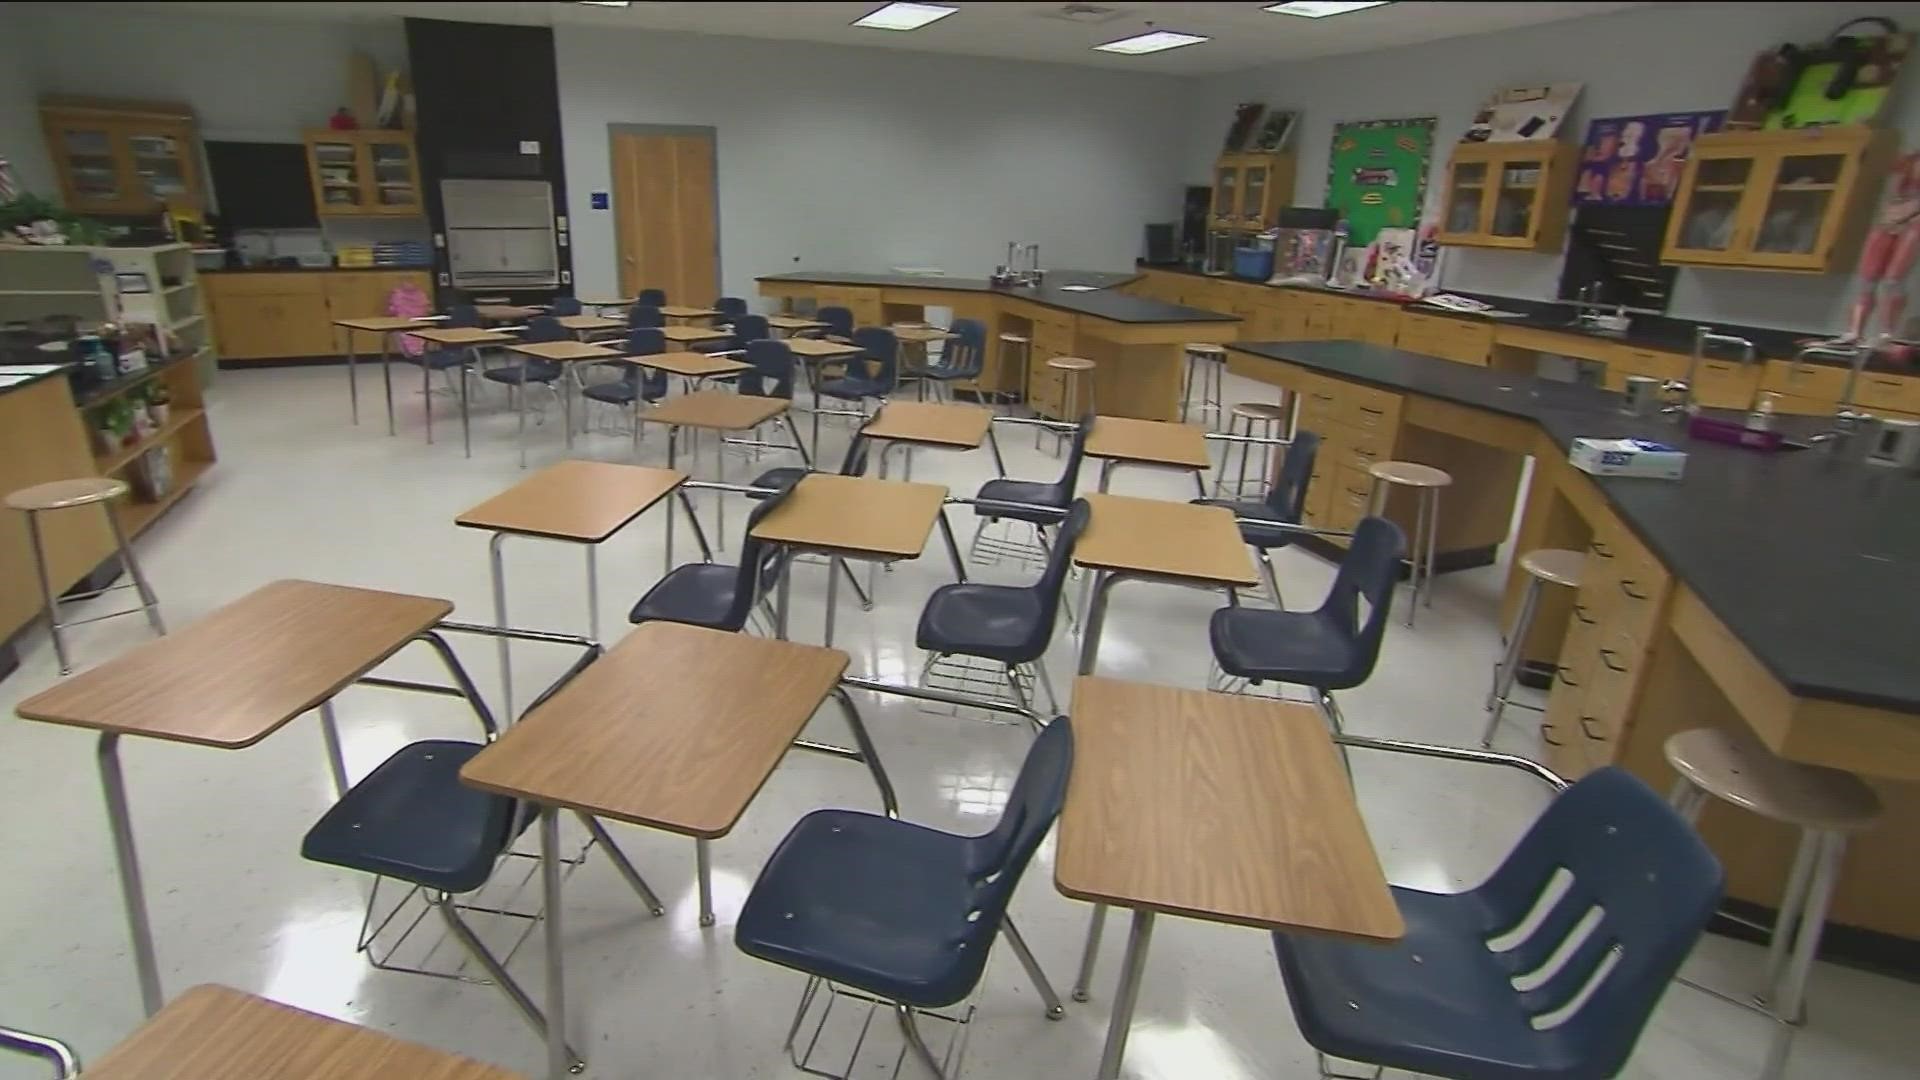 The district says many students have missed so many days they're considered chronically absent.